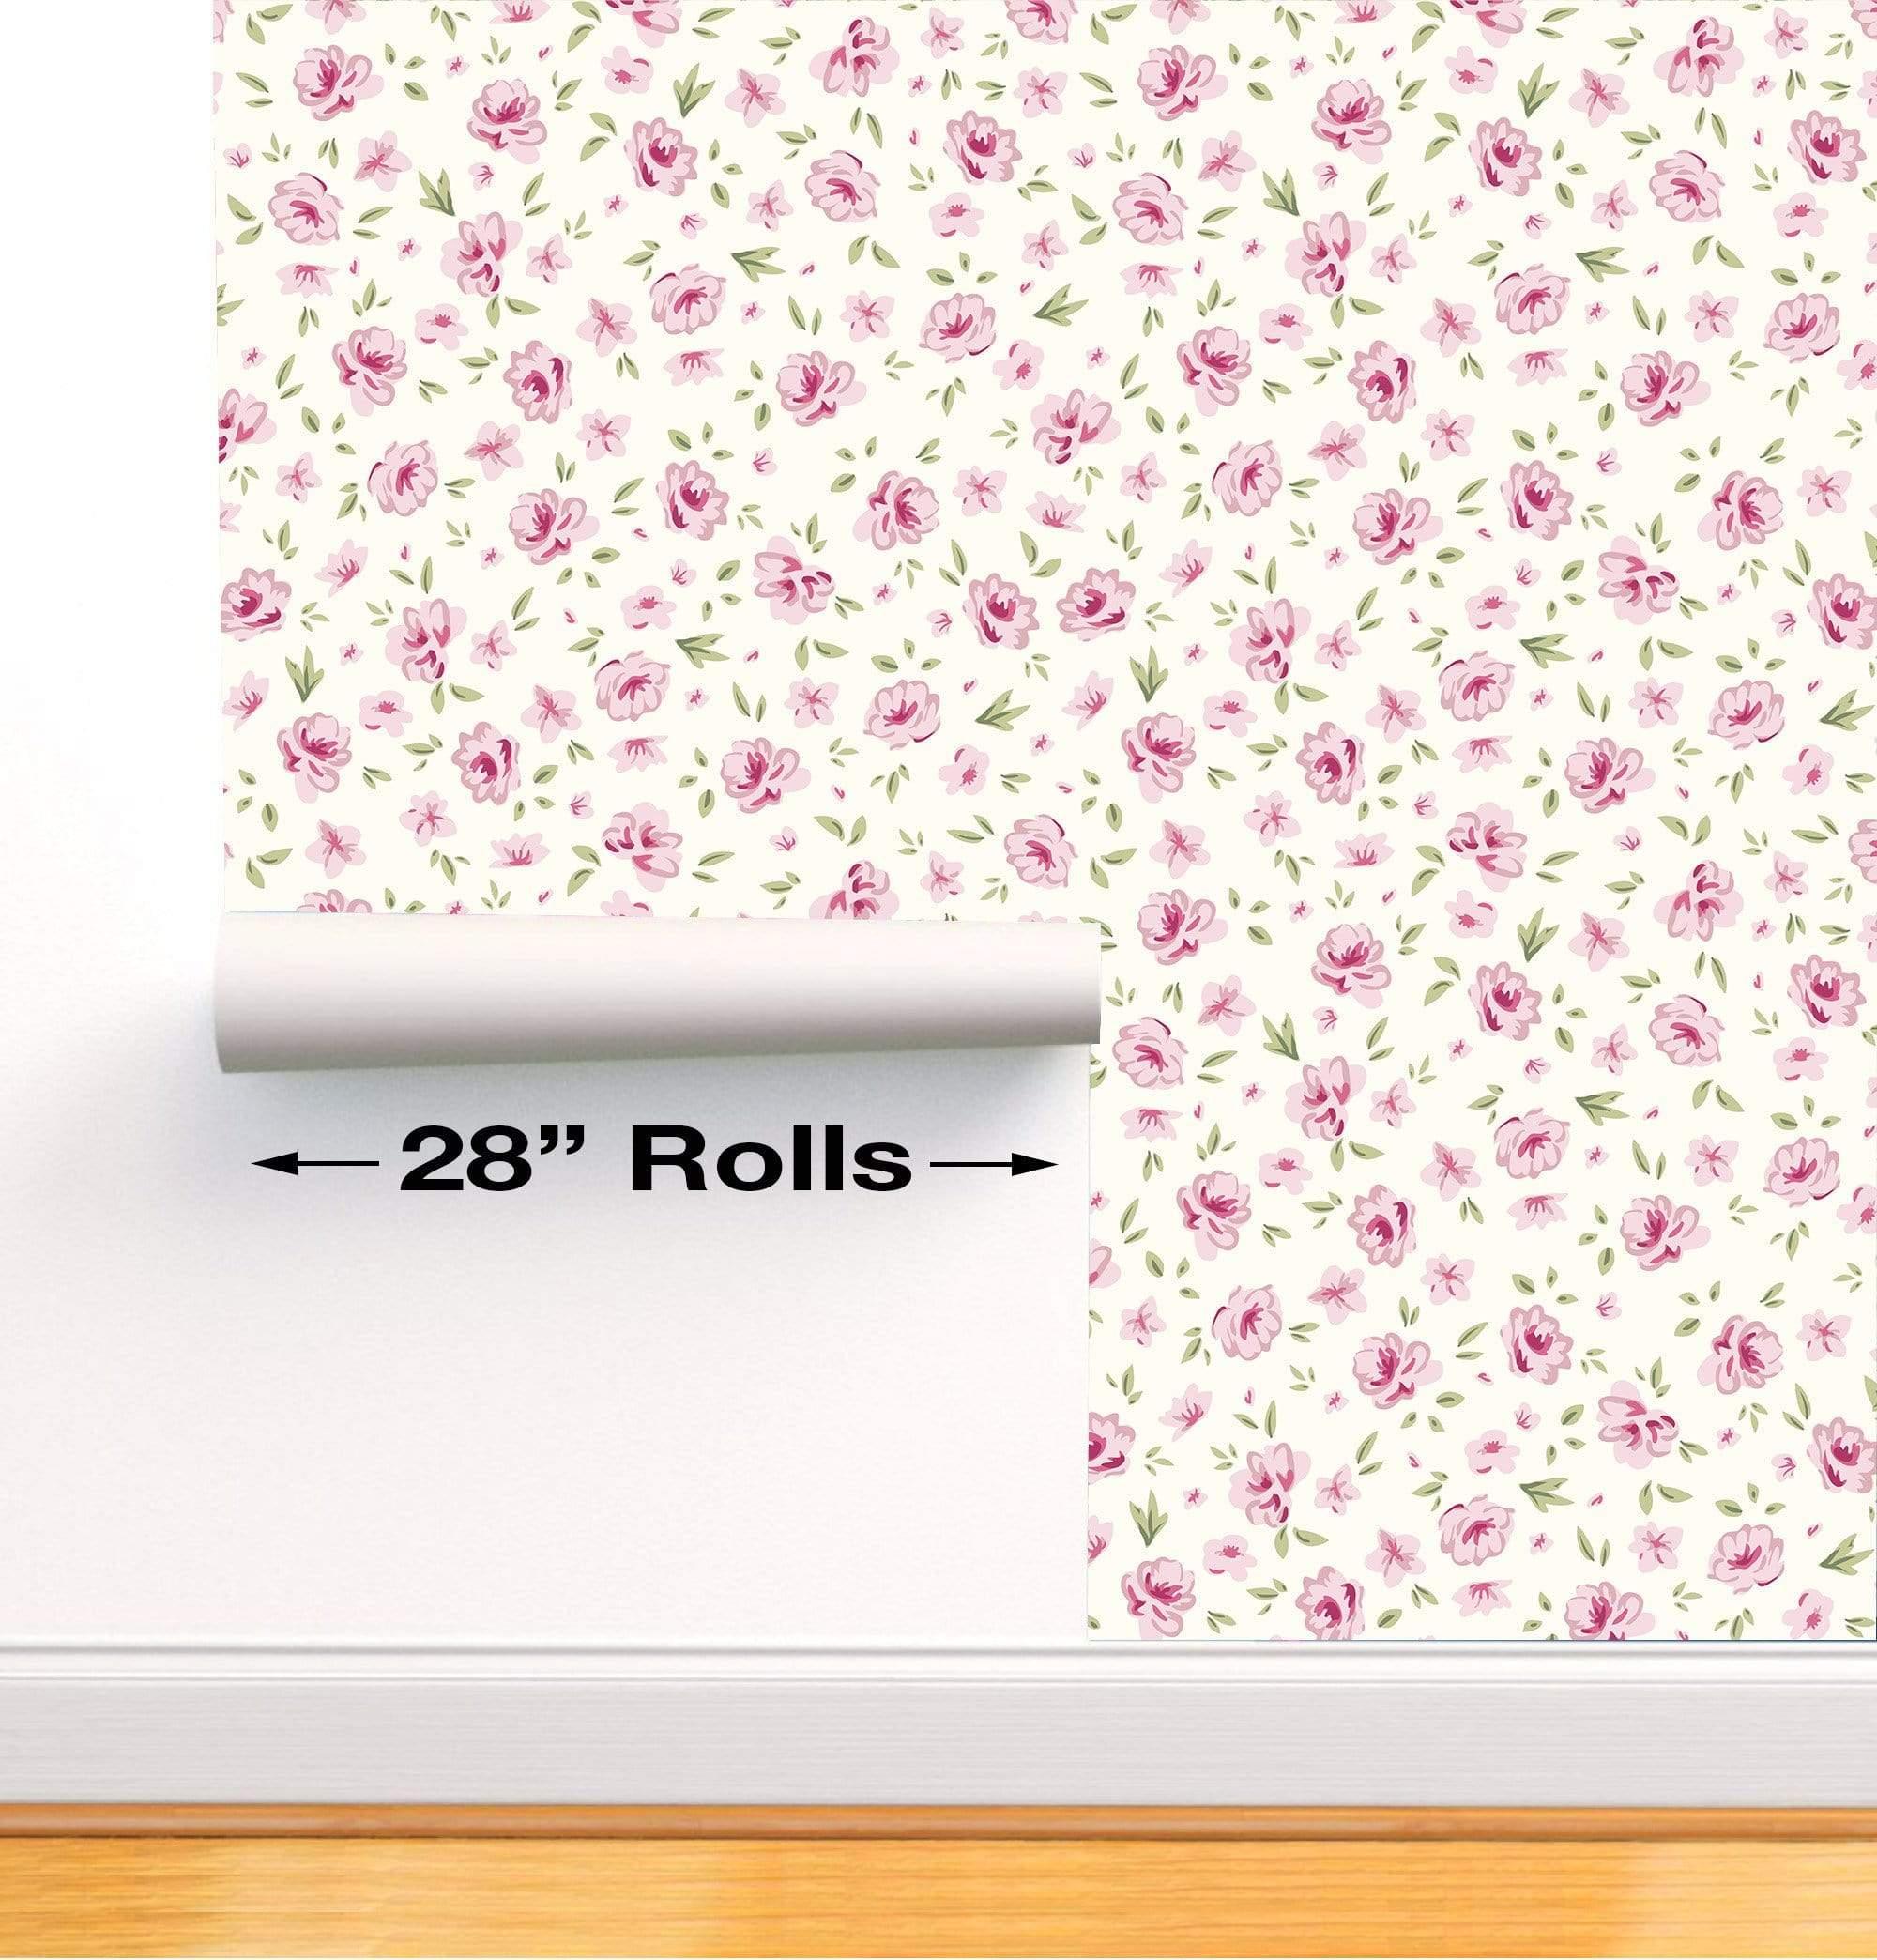 Shabby chic rose pattern floral seamless background 28" Wallpaper